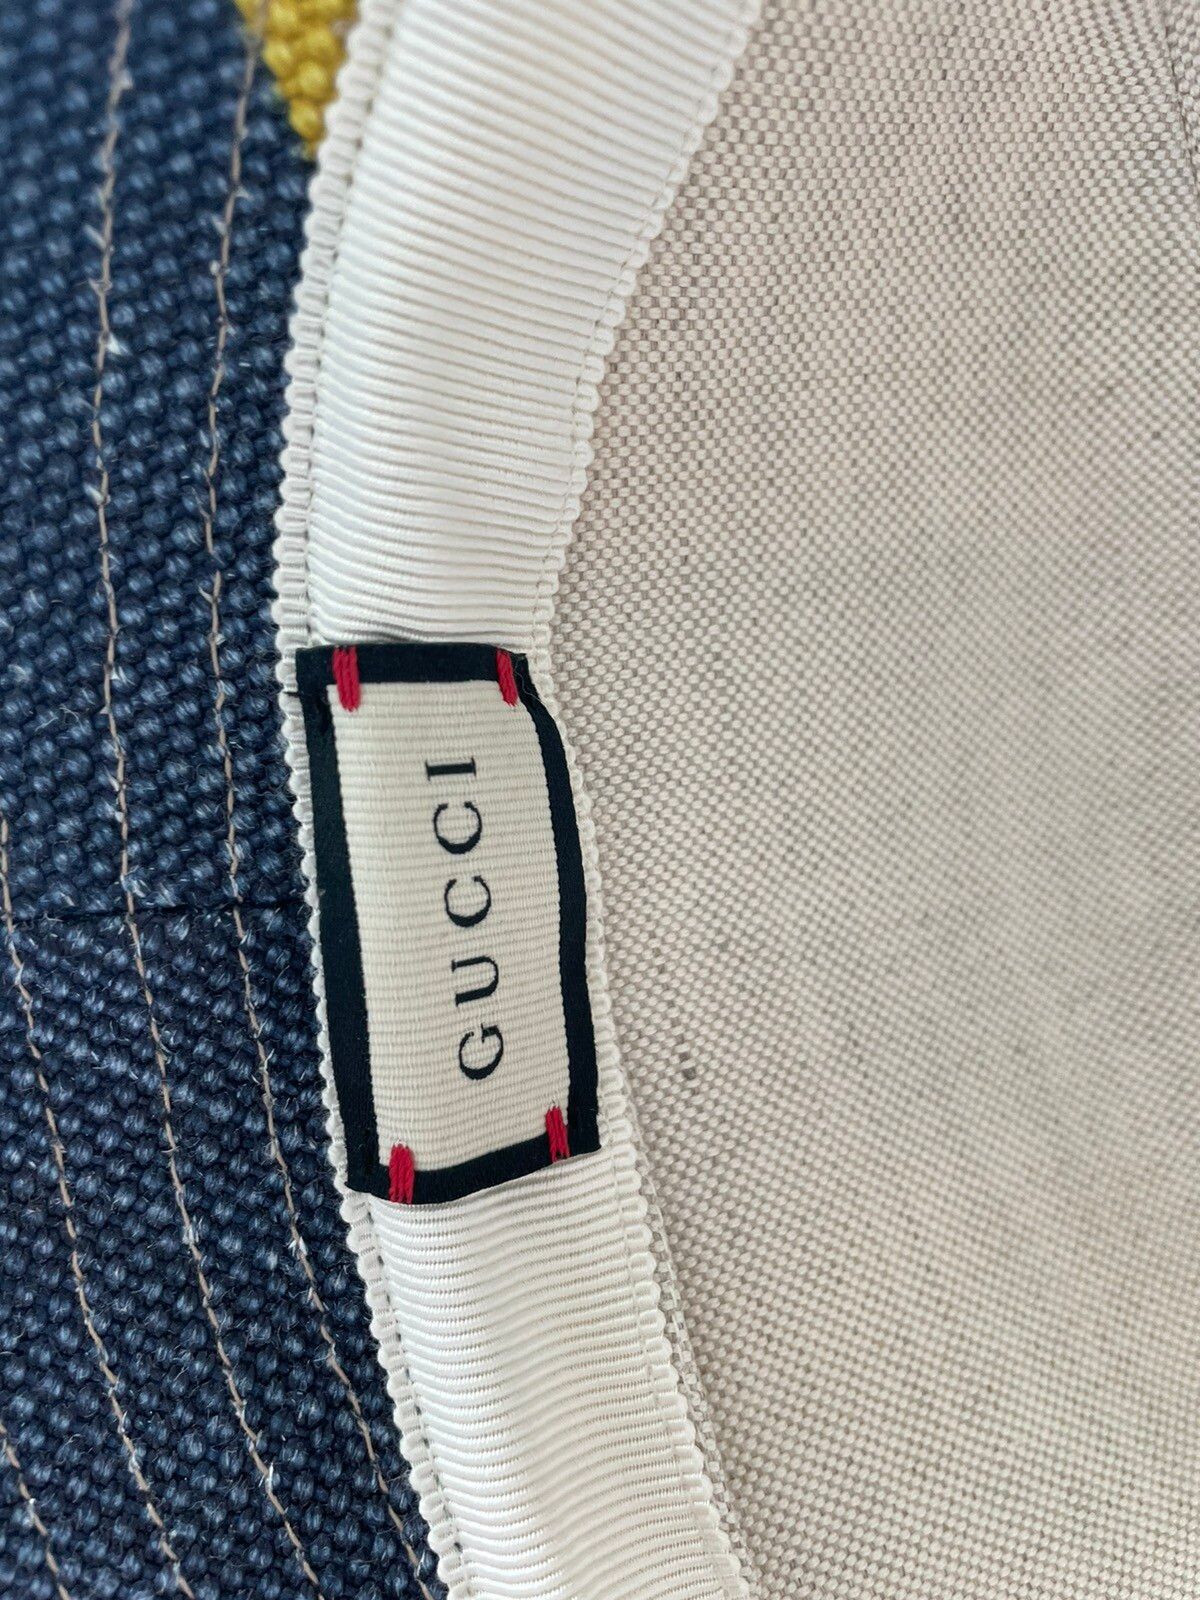 Gucci Brand New Super Runway Limited Edition Rare Gucci Logo Hat Size ONE SIZE - 4 Thumbnail